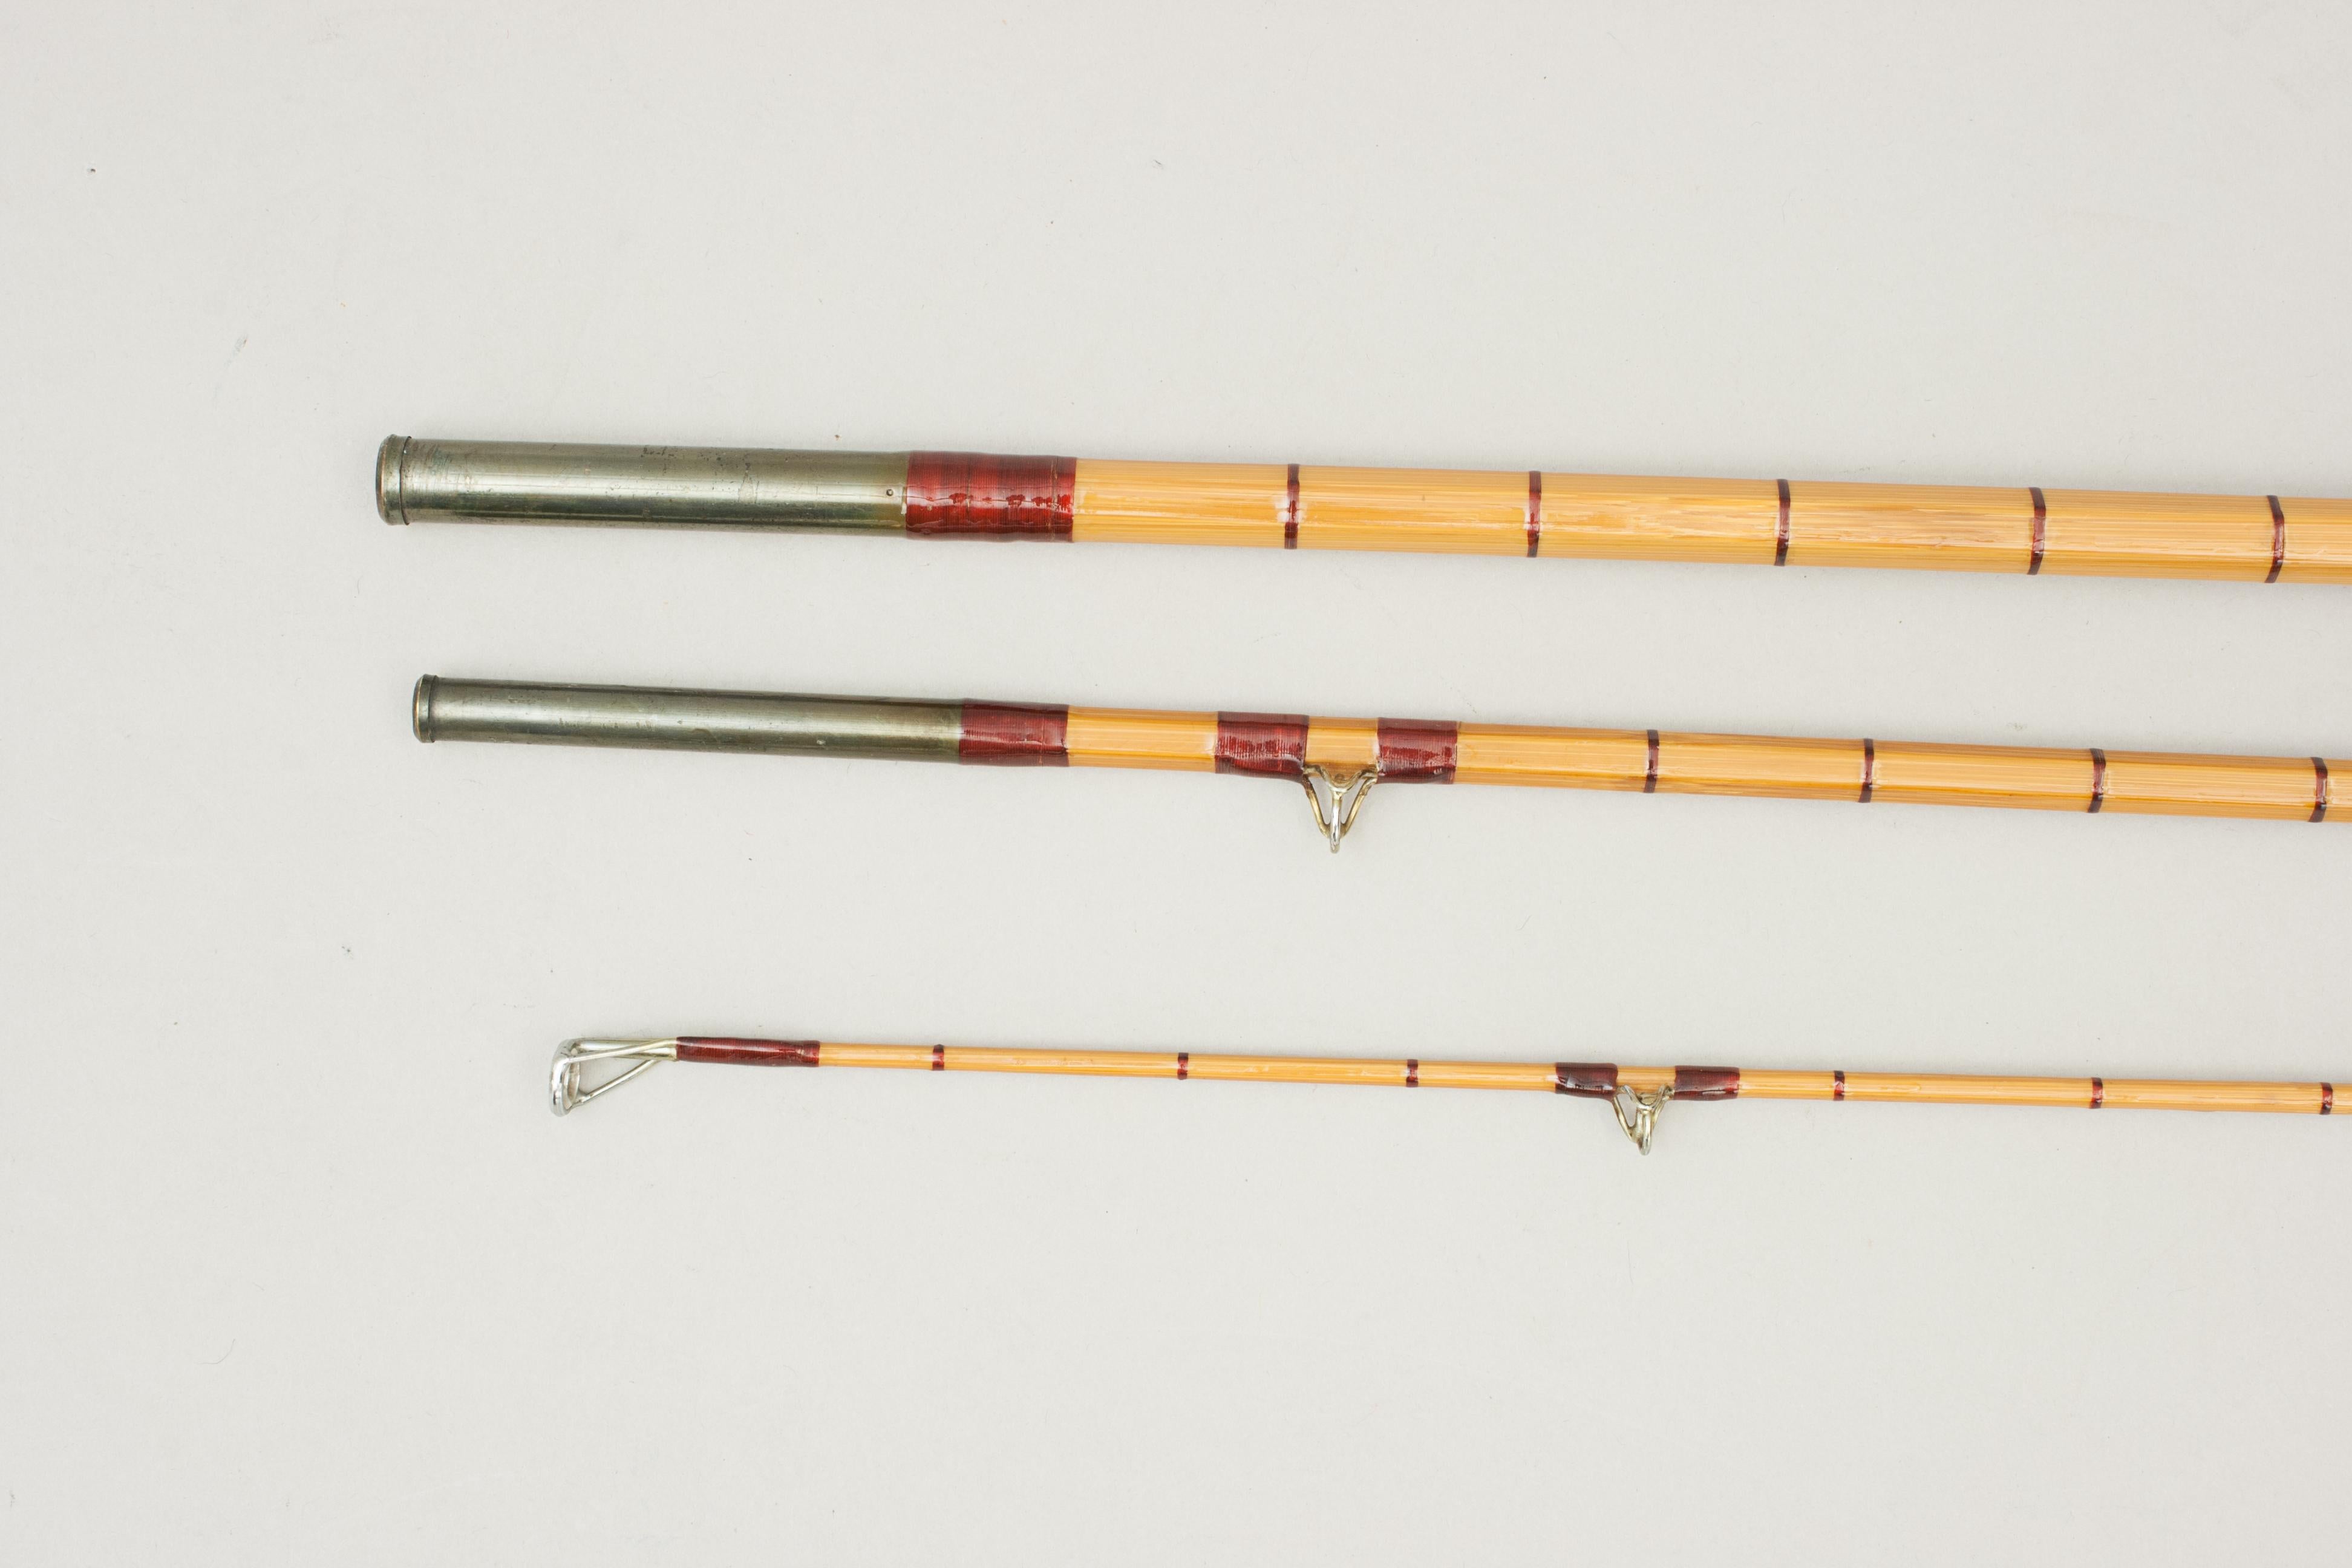 Mid-20th Century Vintage Hardy Fishing Rod, Mitre, Hardy, The Invicta Sea Trout Fly Fishing Rod